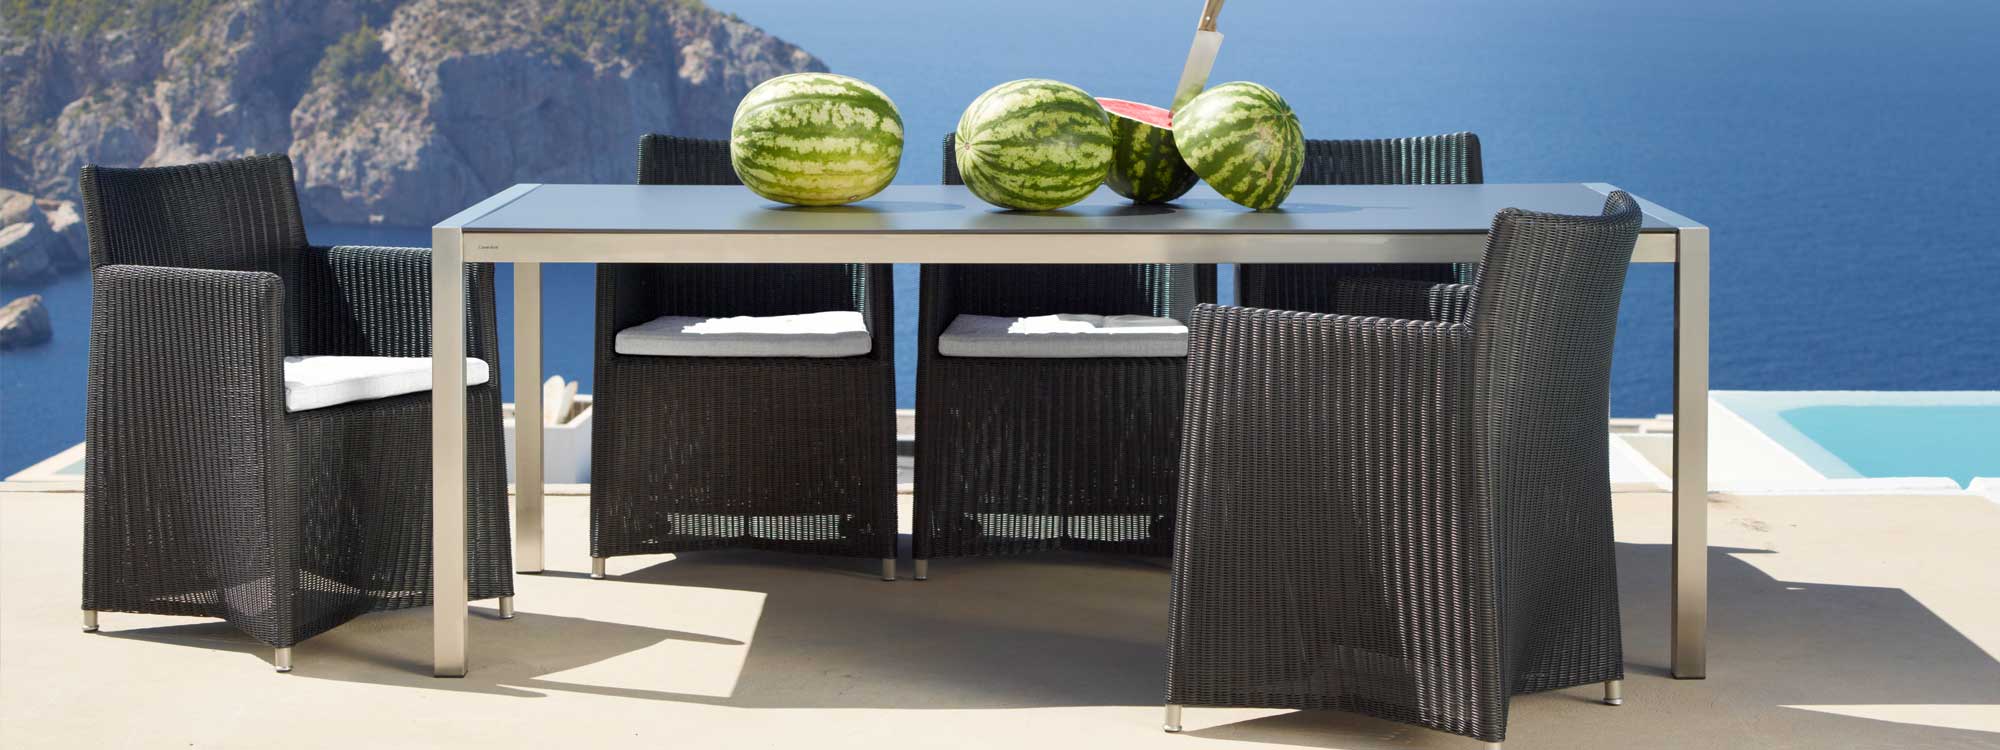 Image of Diamond black woven garden chairs and Cane-line stainless steel dining table with water melons on table top, with dramatic backdrop of sea and headland